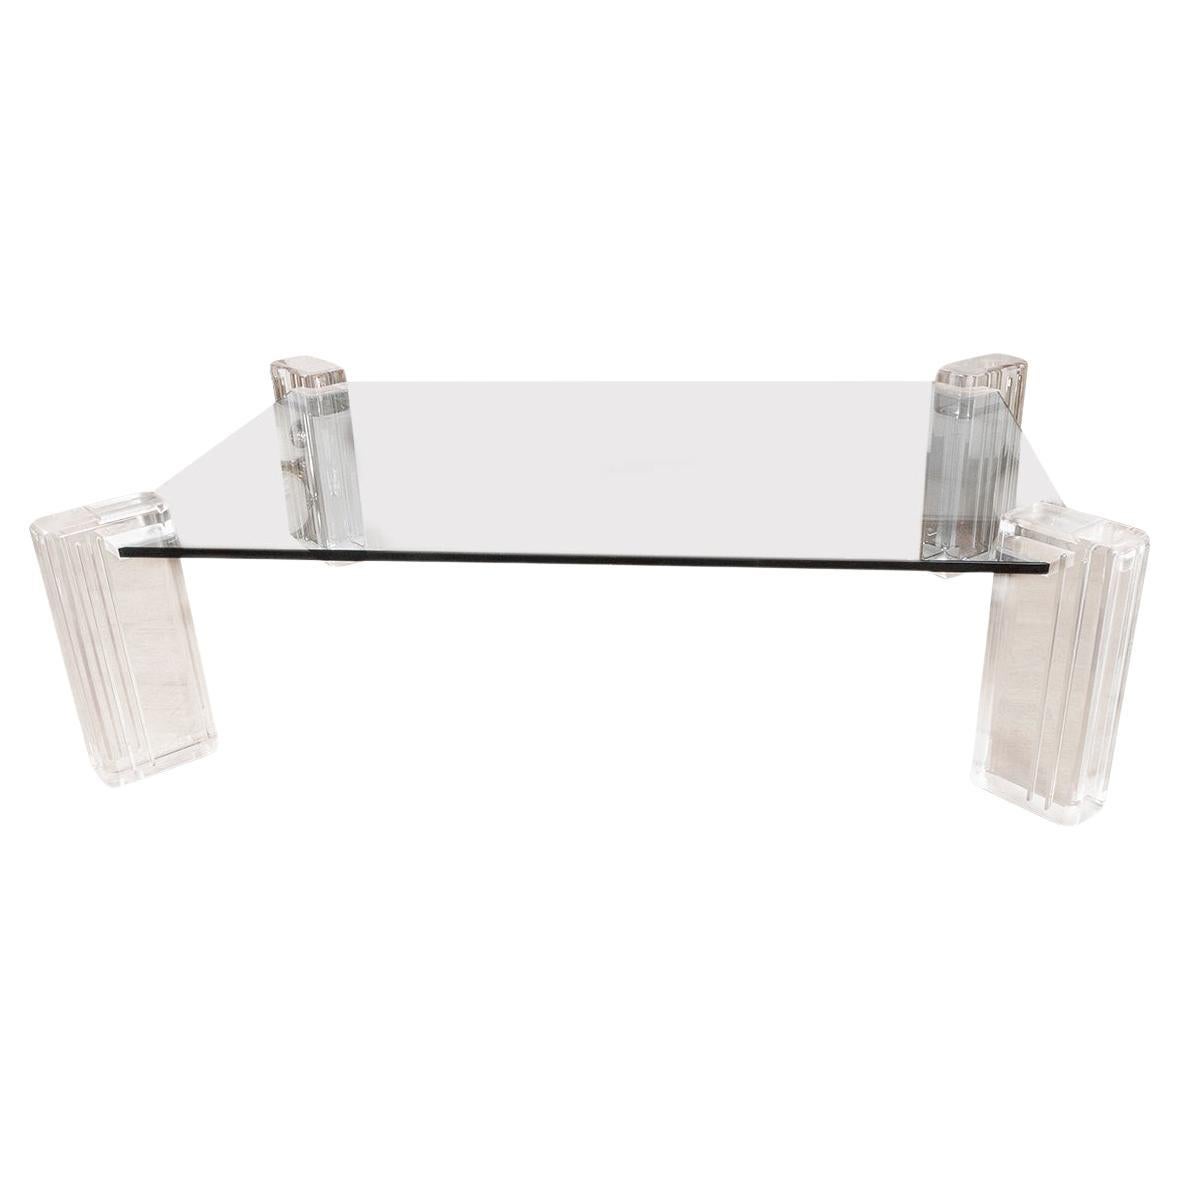 Curved polished nickel side table with cantilevered glass top. 